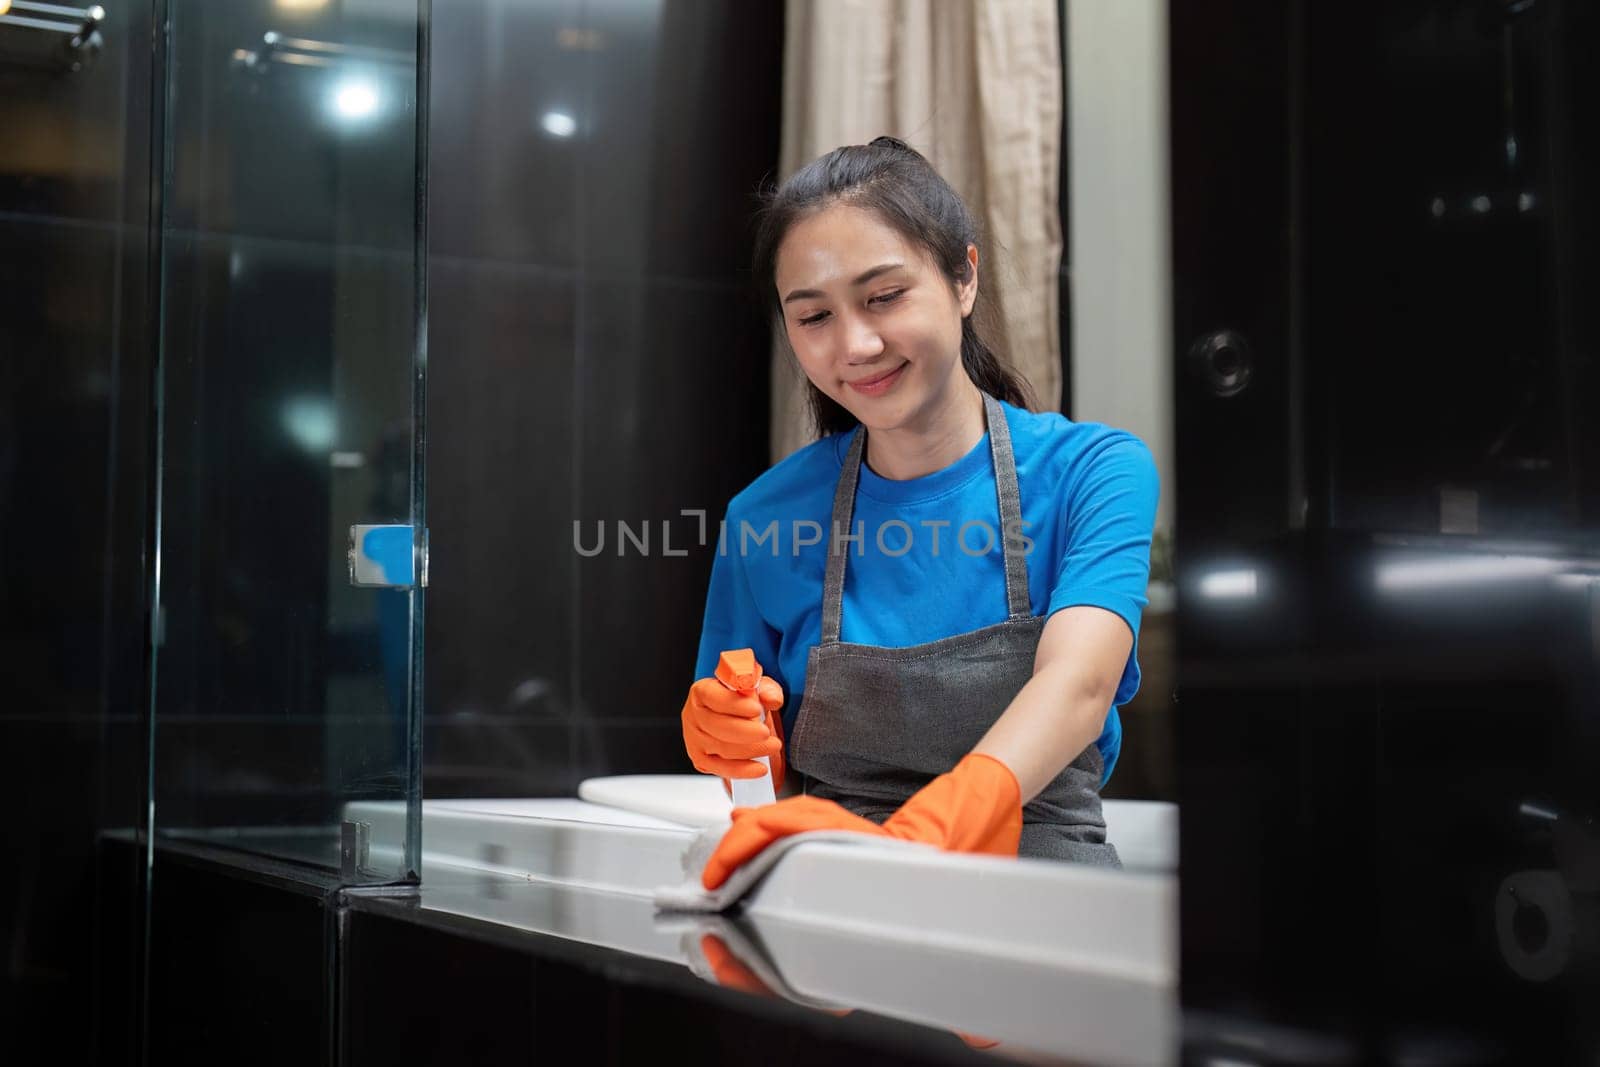 Professional cleaning service company employee in rubber gloves cleaning and detergent spray in bathroom.